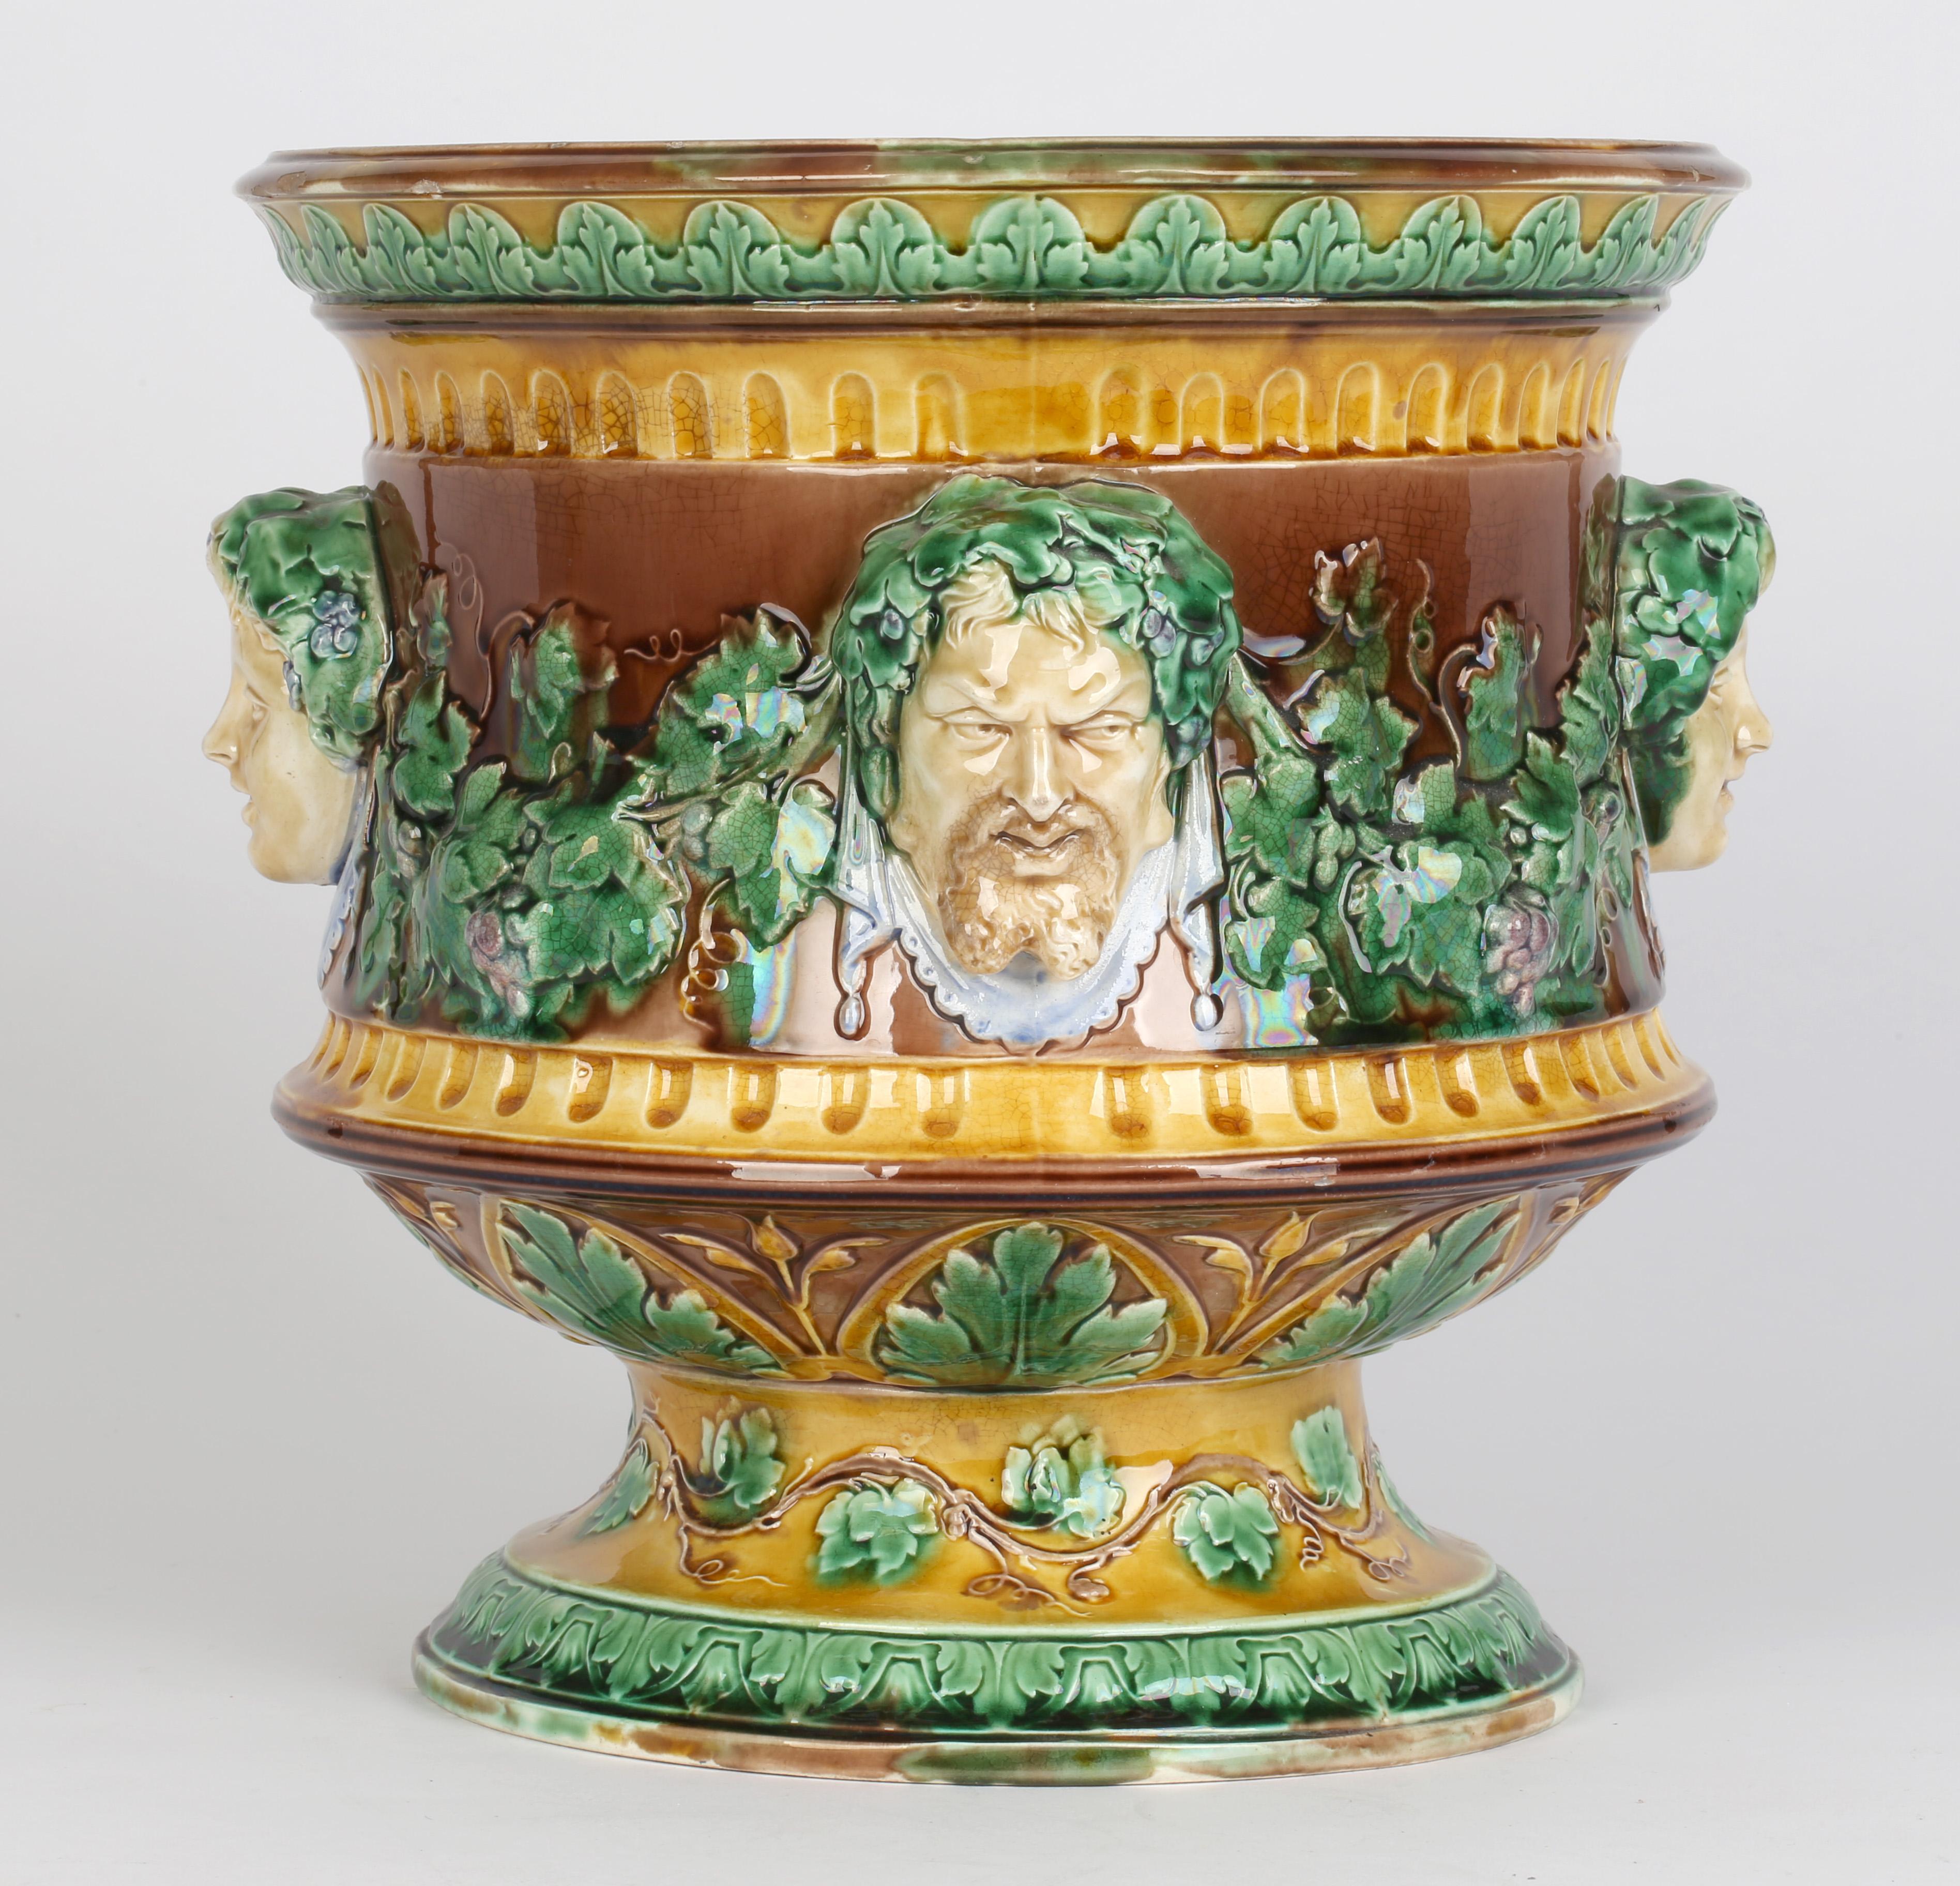 Wedgwood Large and Impressive Majolica Jardiniere with Masks and Trailing Vines For Sale 9